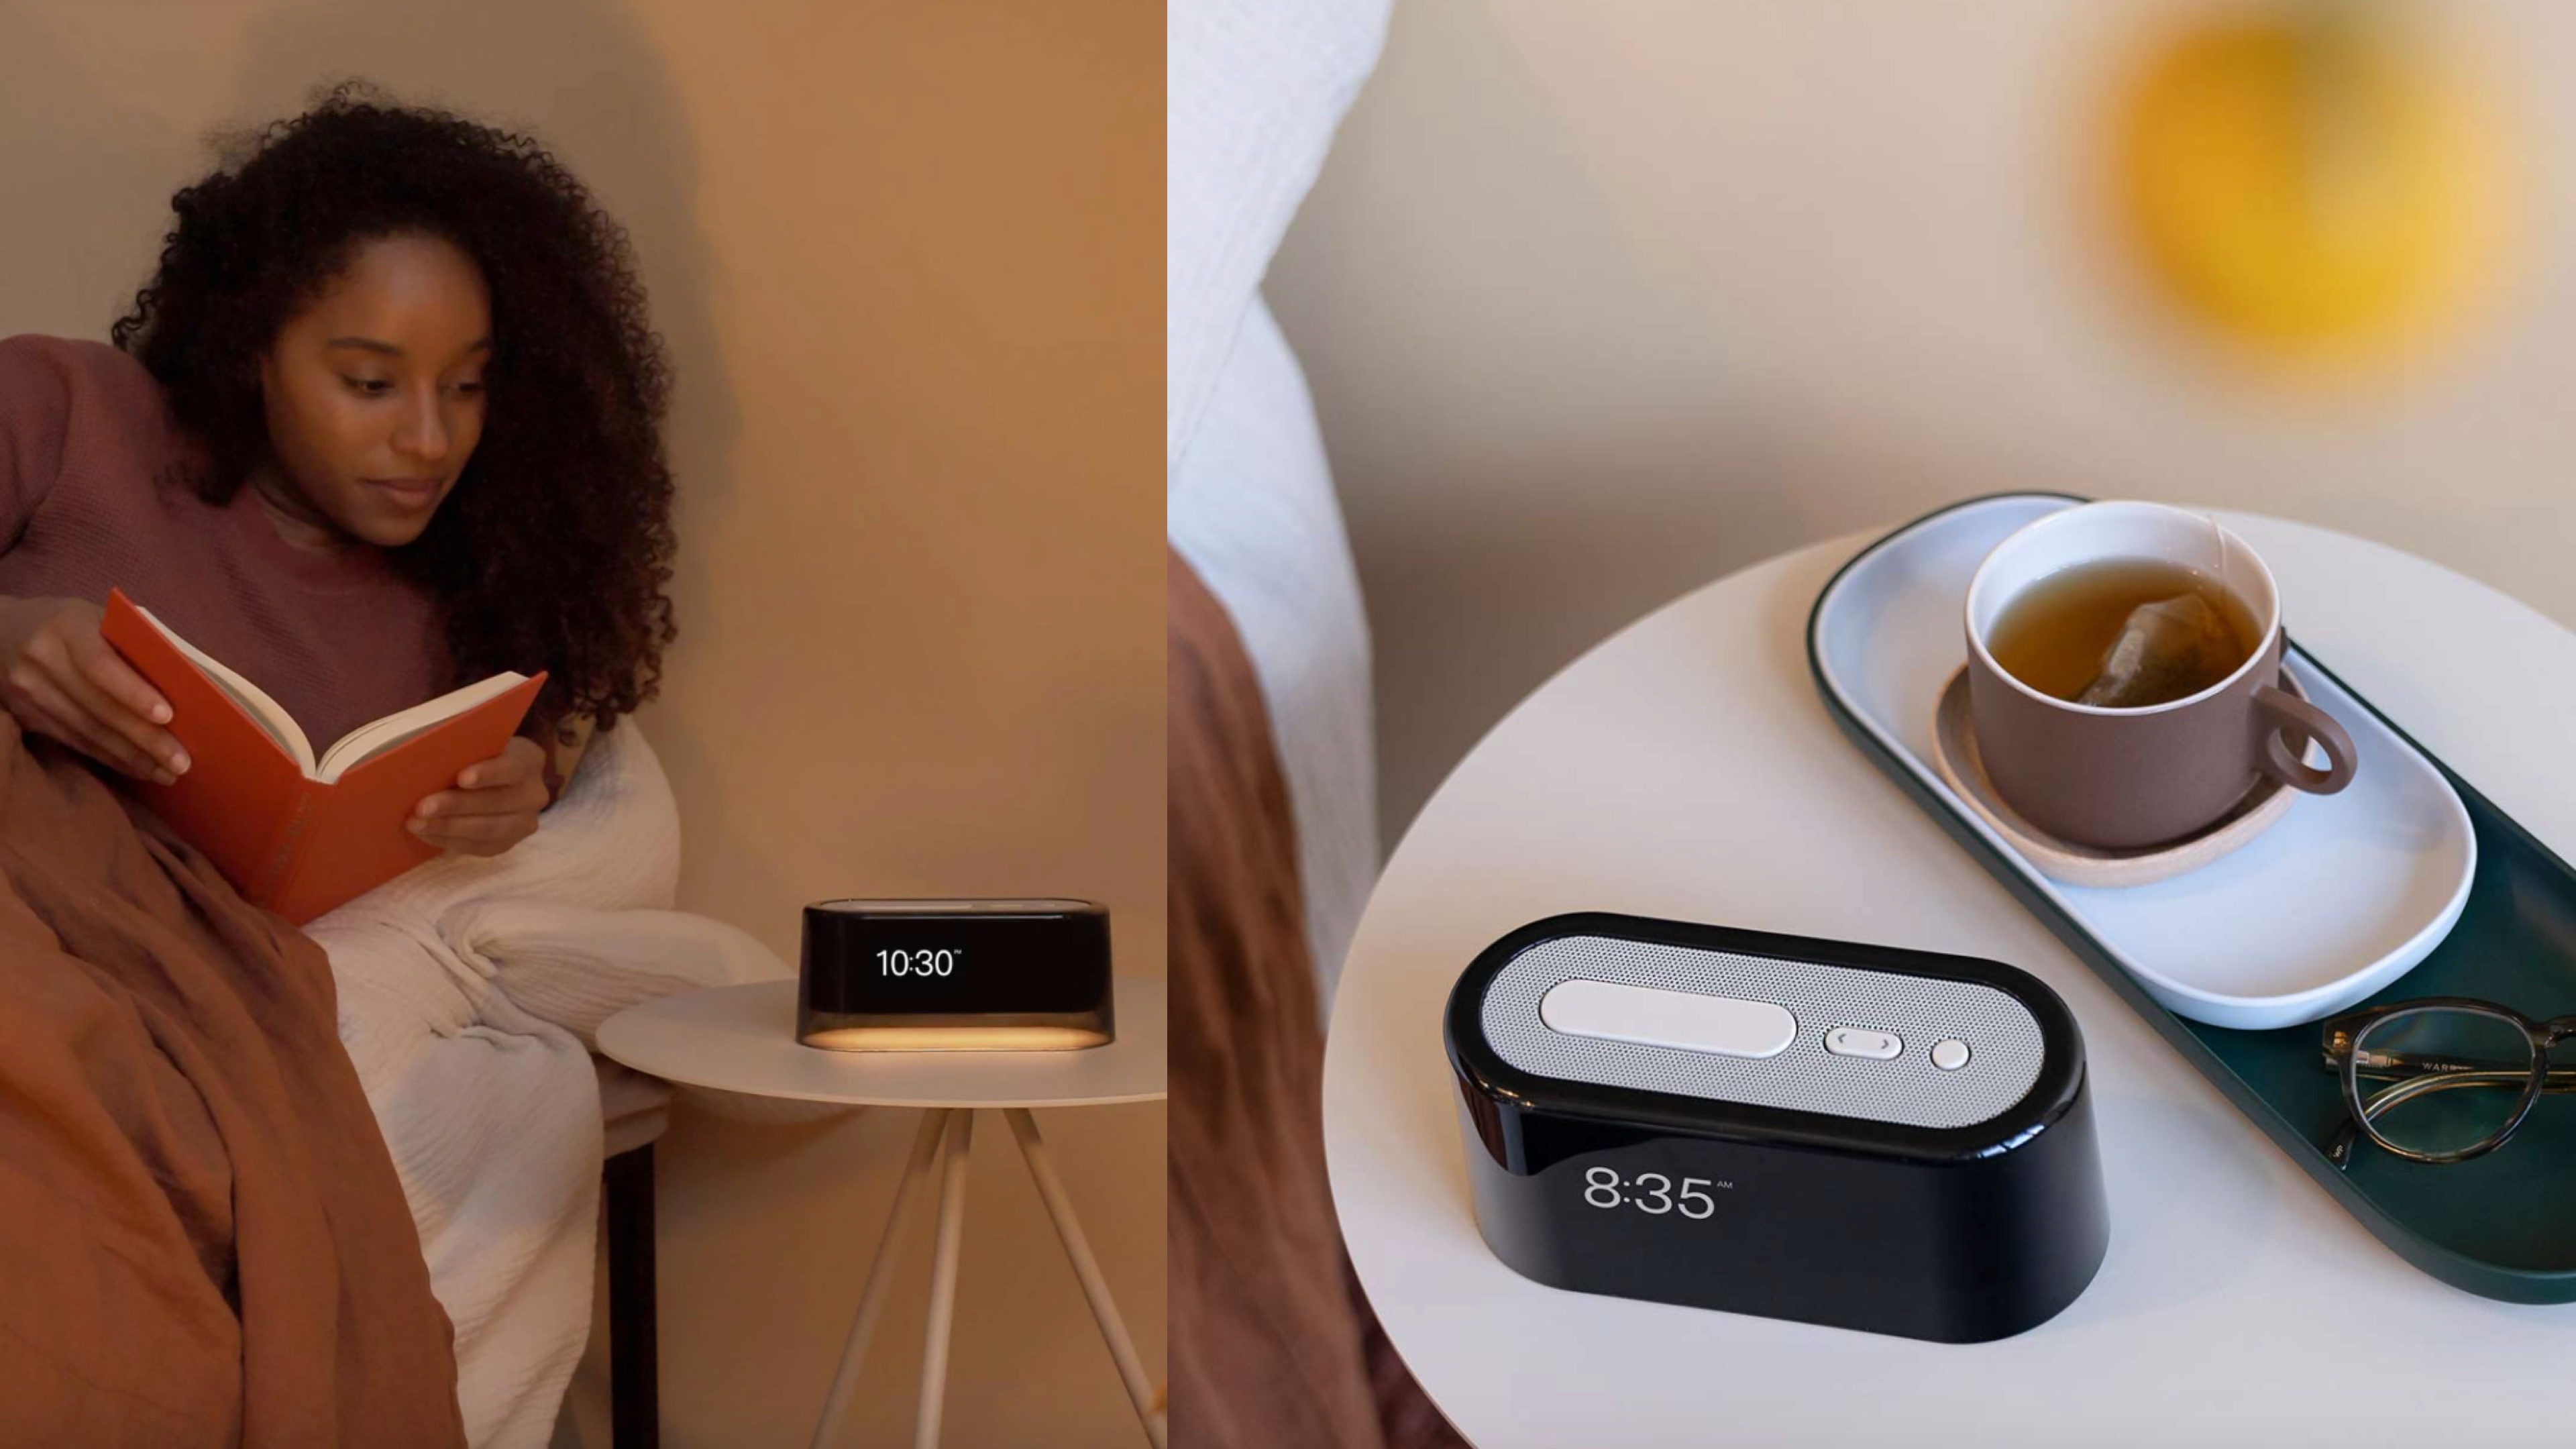 phone-compatible alarm clock that is also a noise machine and night light